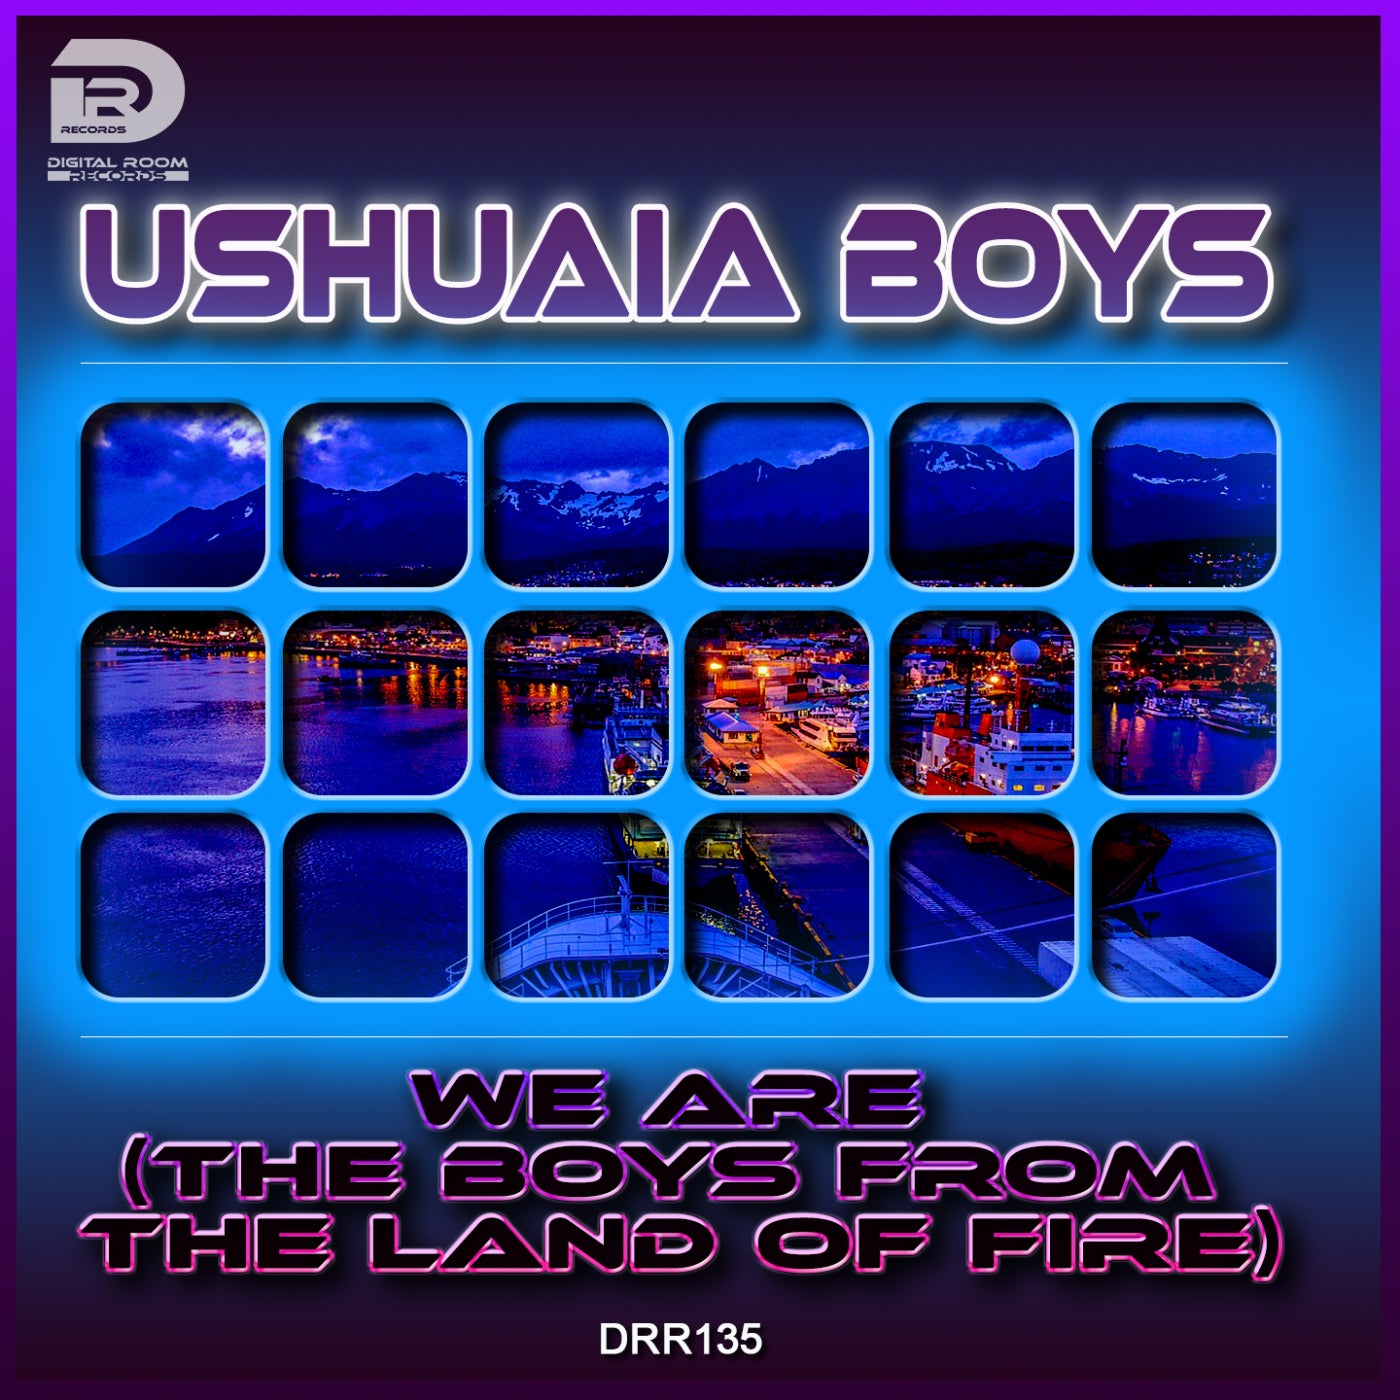 We are (The Boys from the Land of Fire)